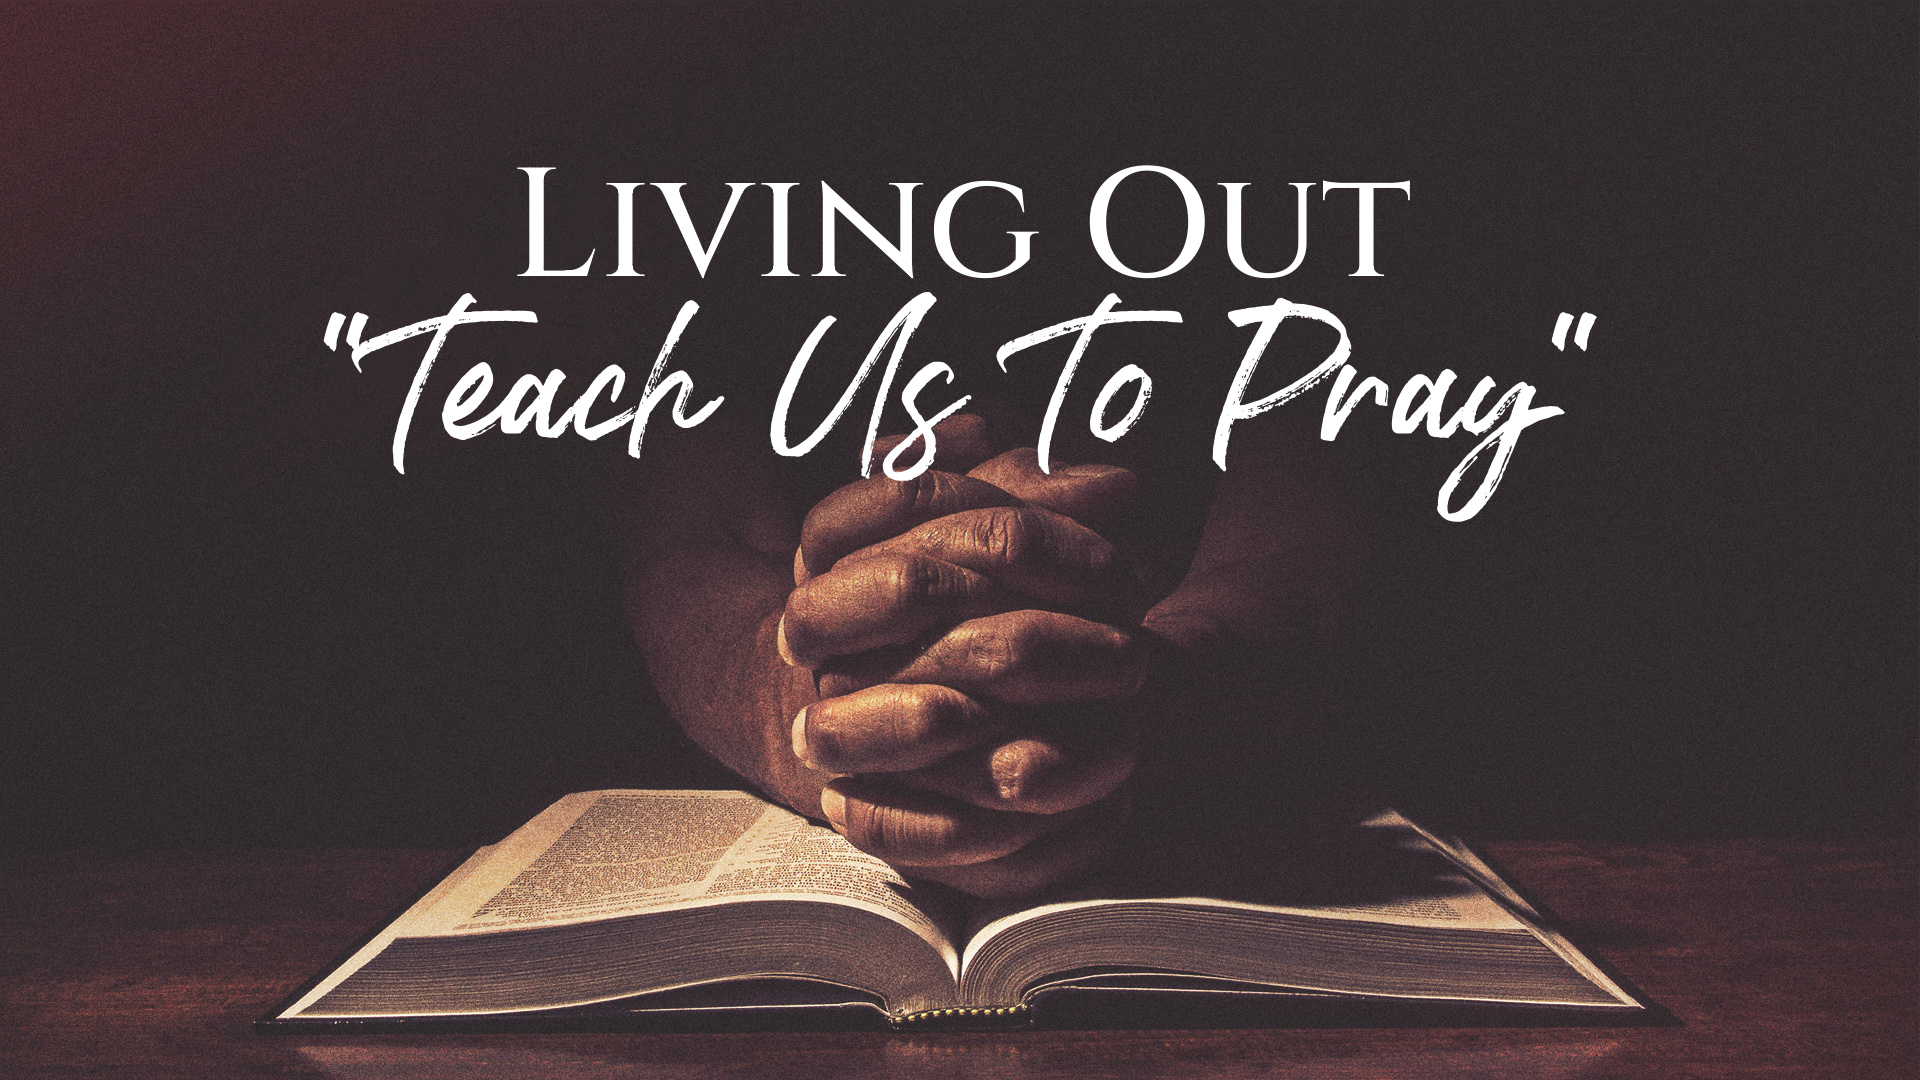 Living Out, "Teach Us To Pray"